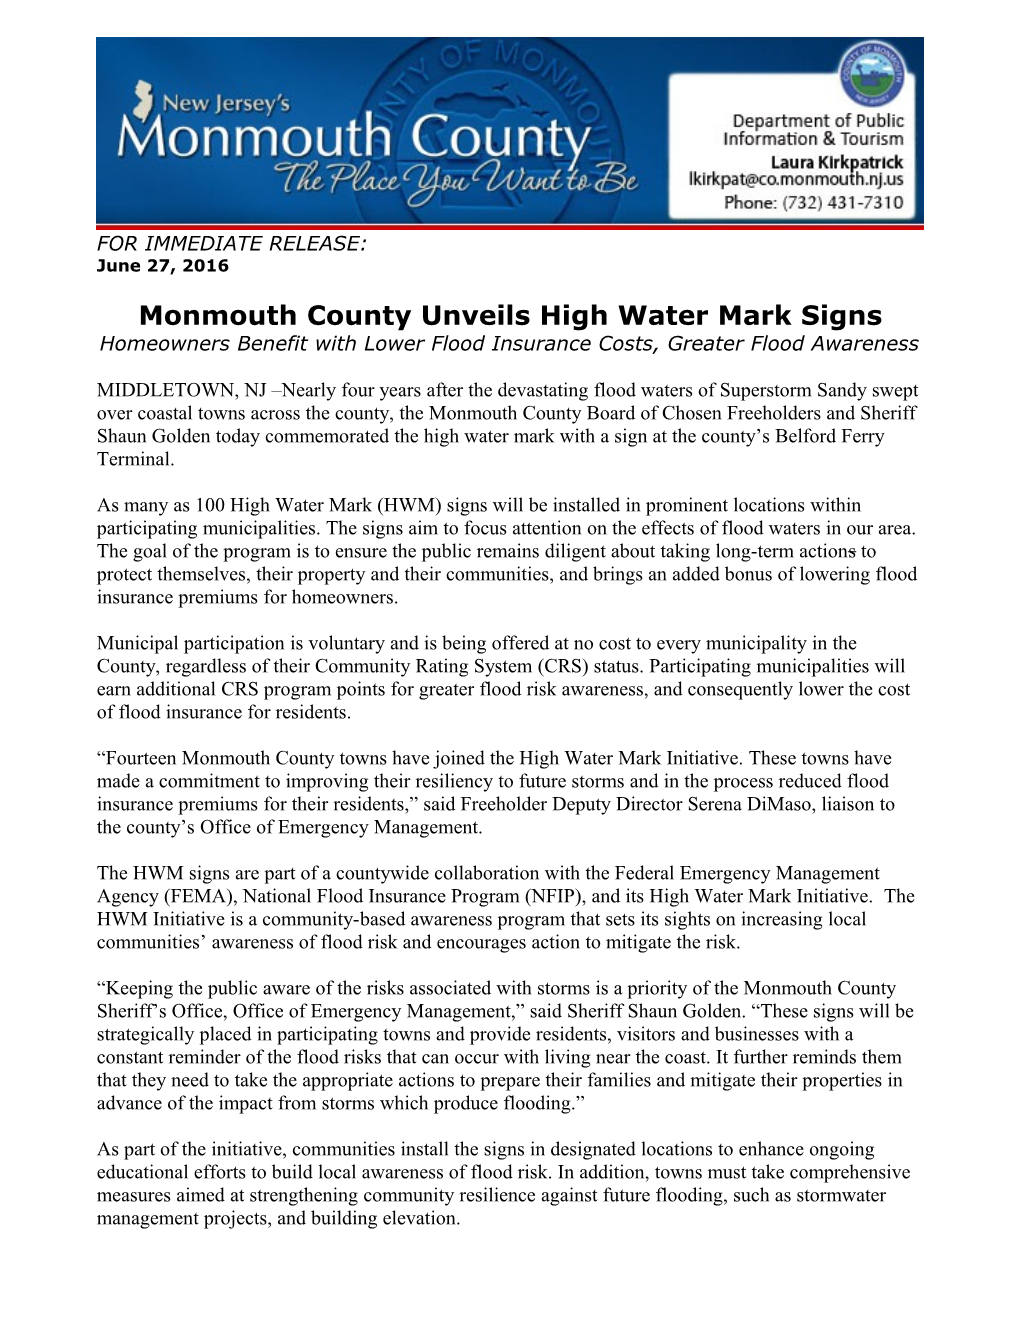 Monmouth County Unveils High Water Mark Signs